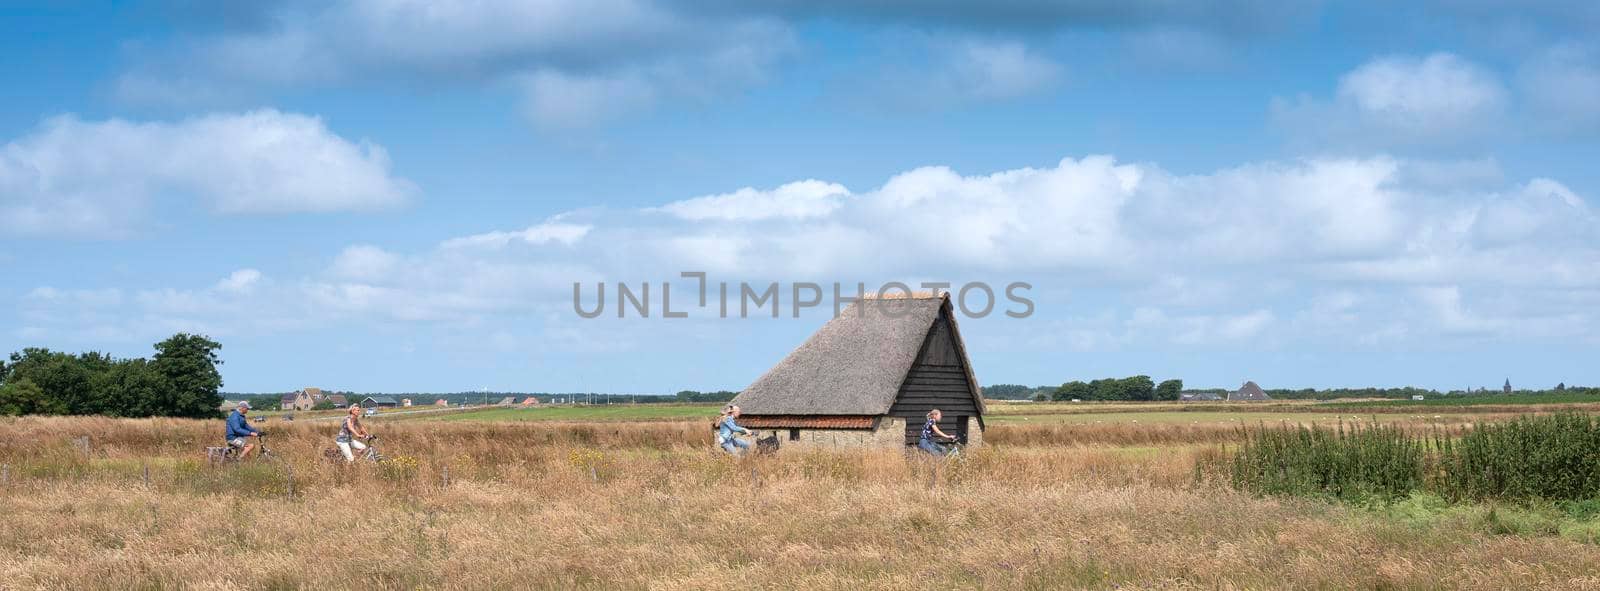 people on bicycle near typical barn on the island of texel in the netherlands by ahavelaar